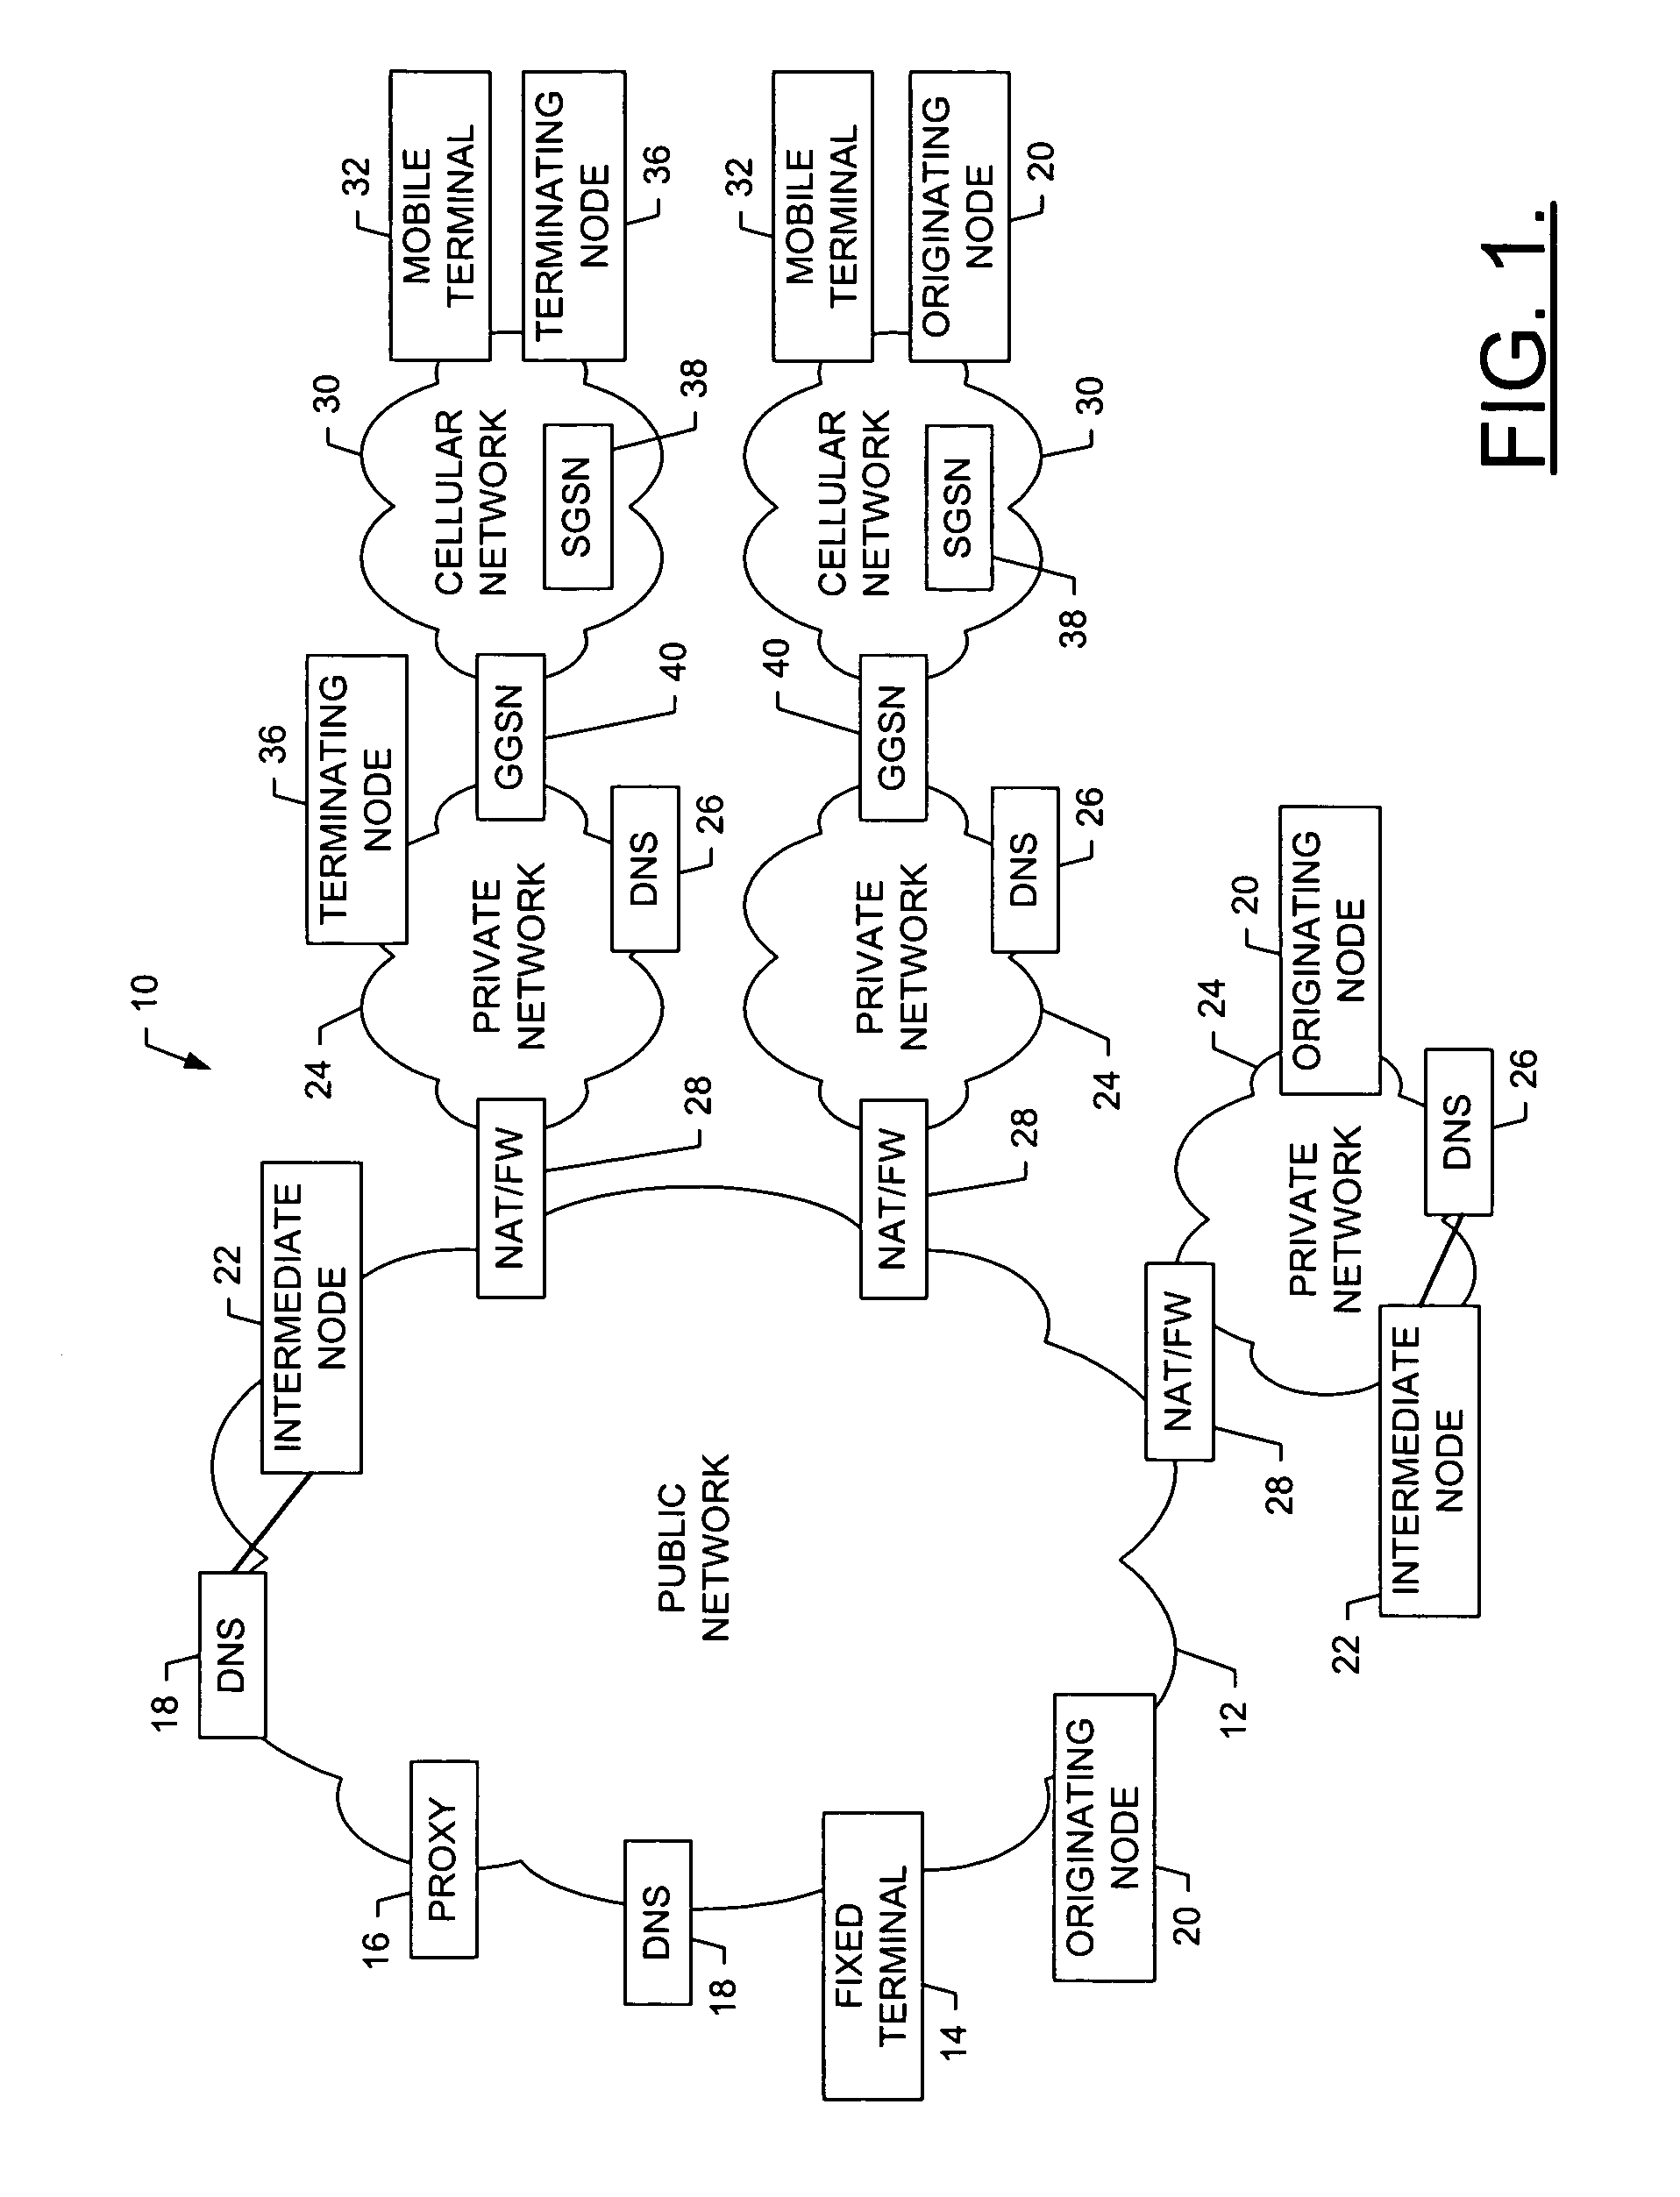 System and method for establishing an internet protocol connection with a terminating network node